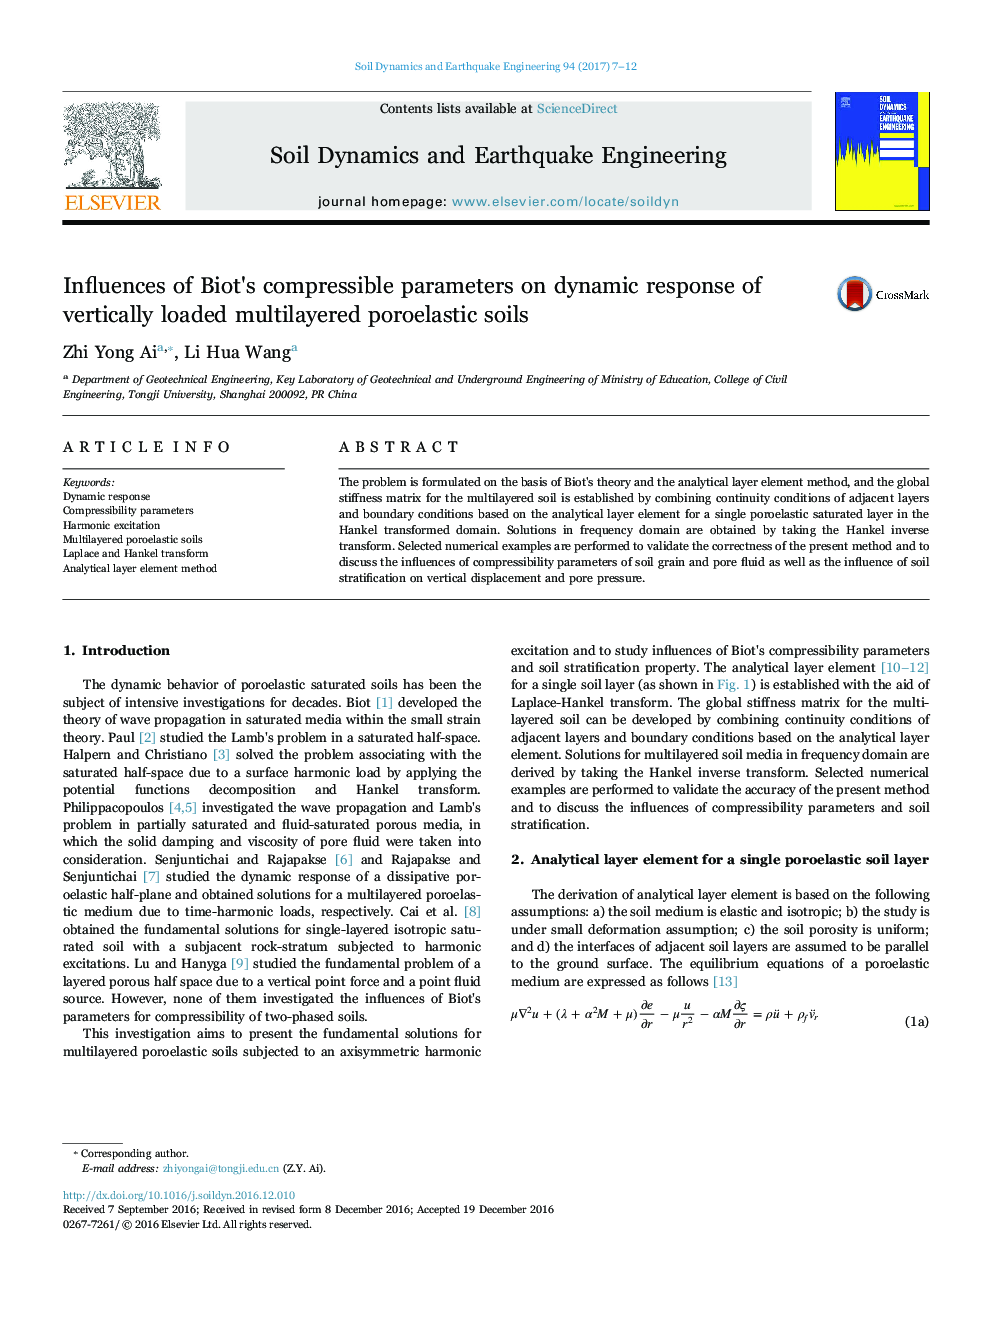 Influences of Biot's compressible parameters on dynamic response of vertically loaded multilayered poroelastic soils